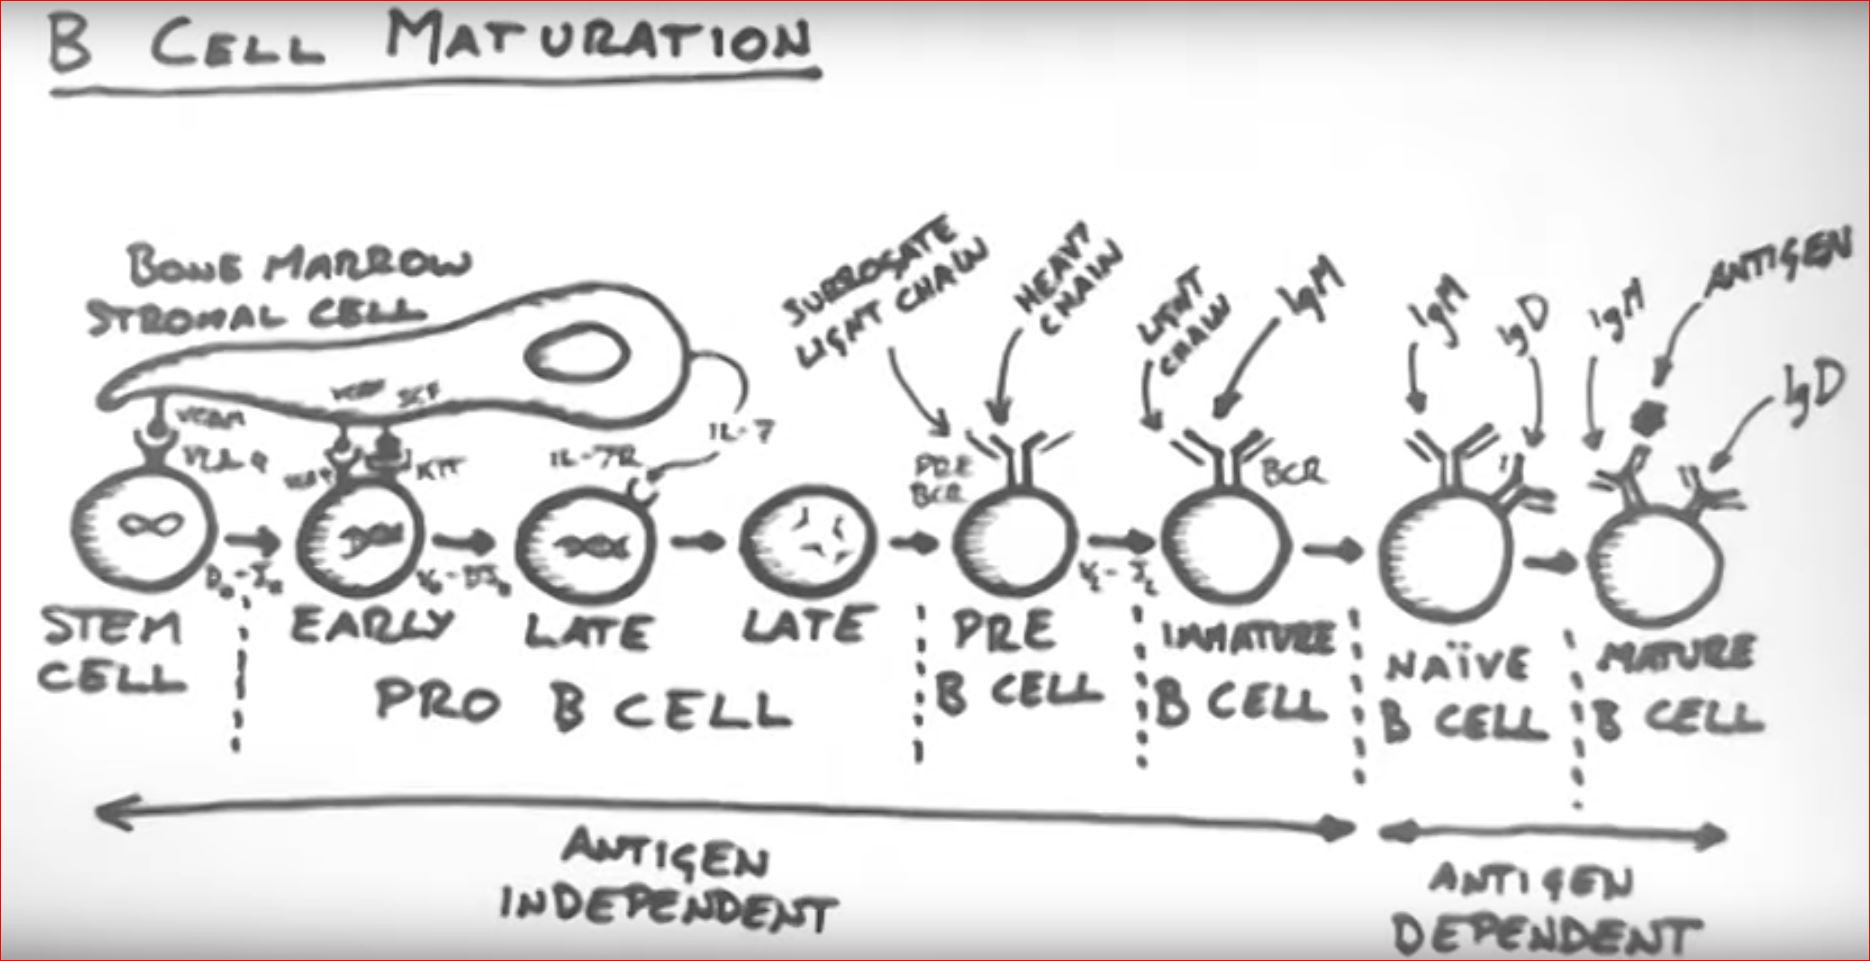 Click image for larger version  Name:	B cell maturation.JPG Views:	9 Size:	199.0 KB ID:	907704